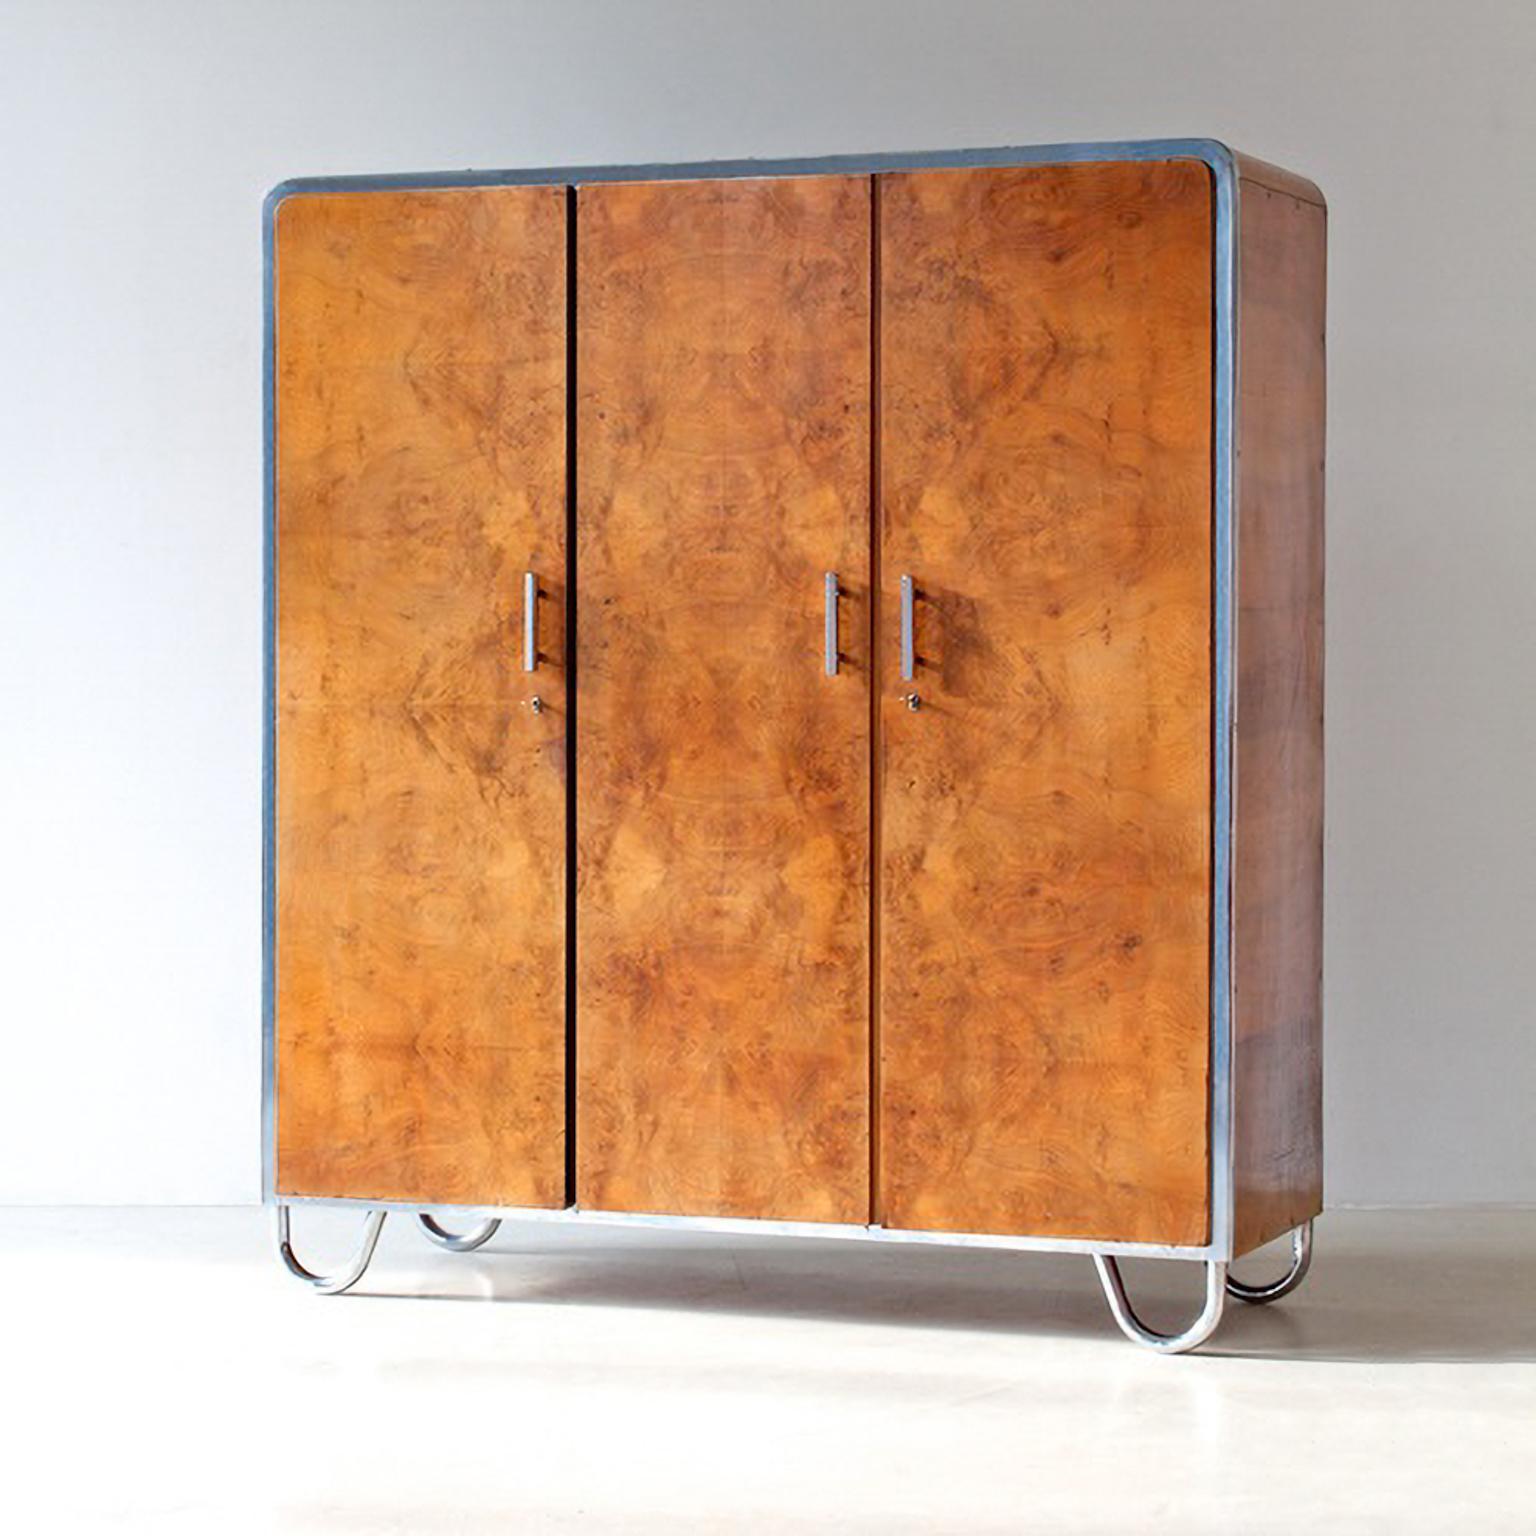 Art Deco- streamline 3-door wardrobe designed by Arch. Hana Kucerová-Záveská (Czech, 1904–1944) and manufactured by Robert Slezák Company, circa 1935. The outstanding form of this wardrobe is the expression of a modern and innovative design as